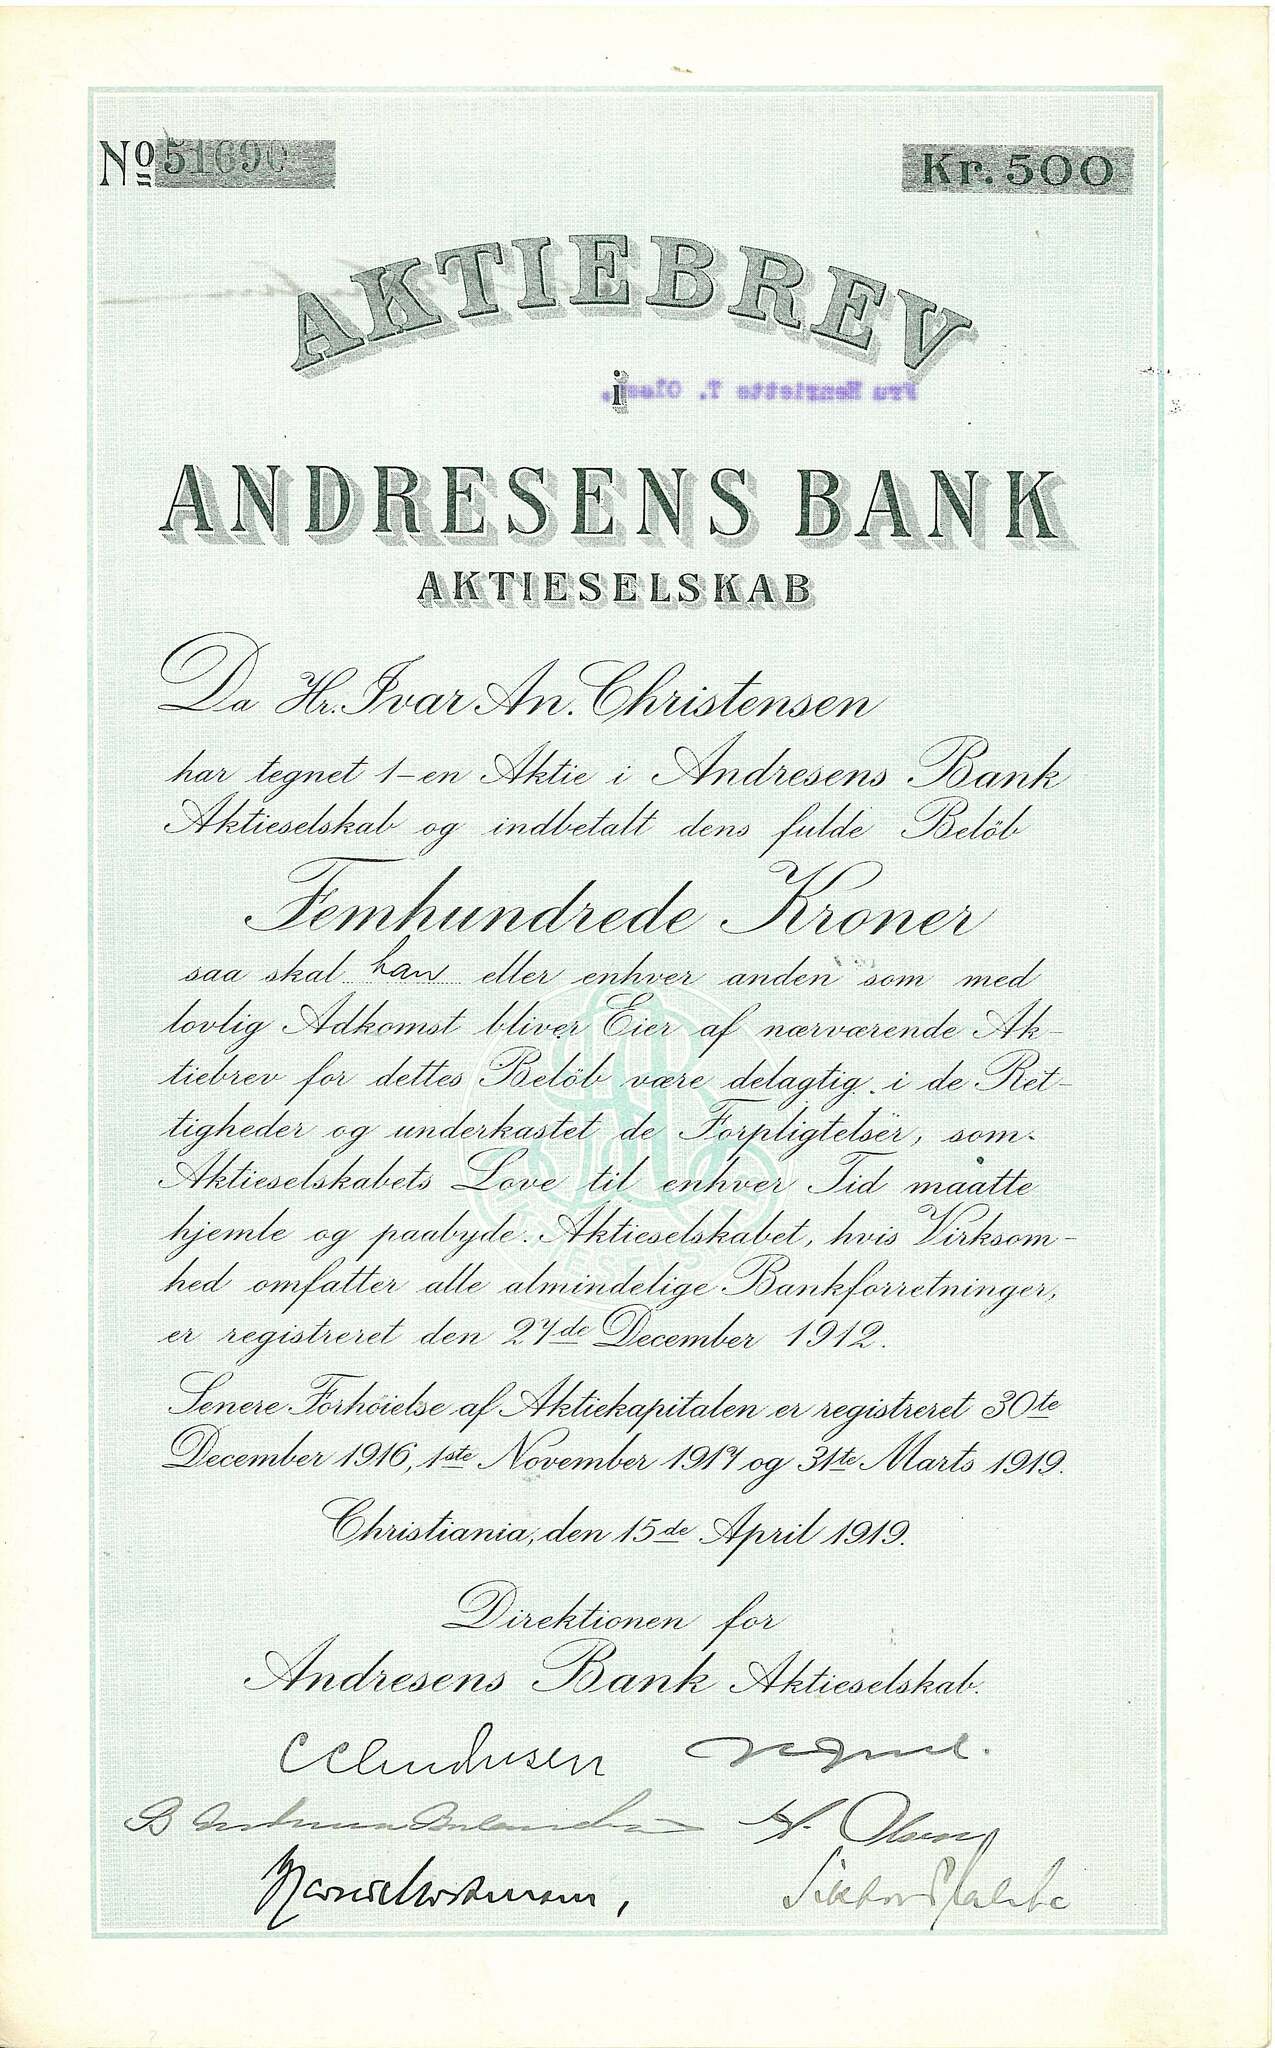 Andresens Bank AS